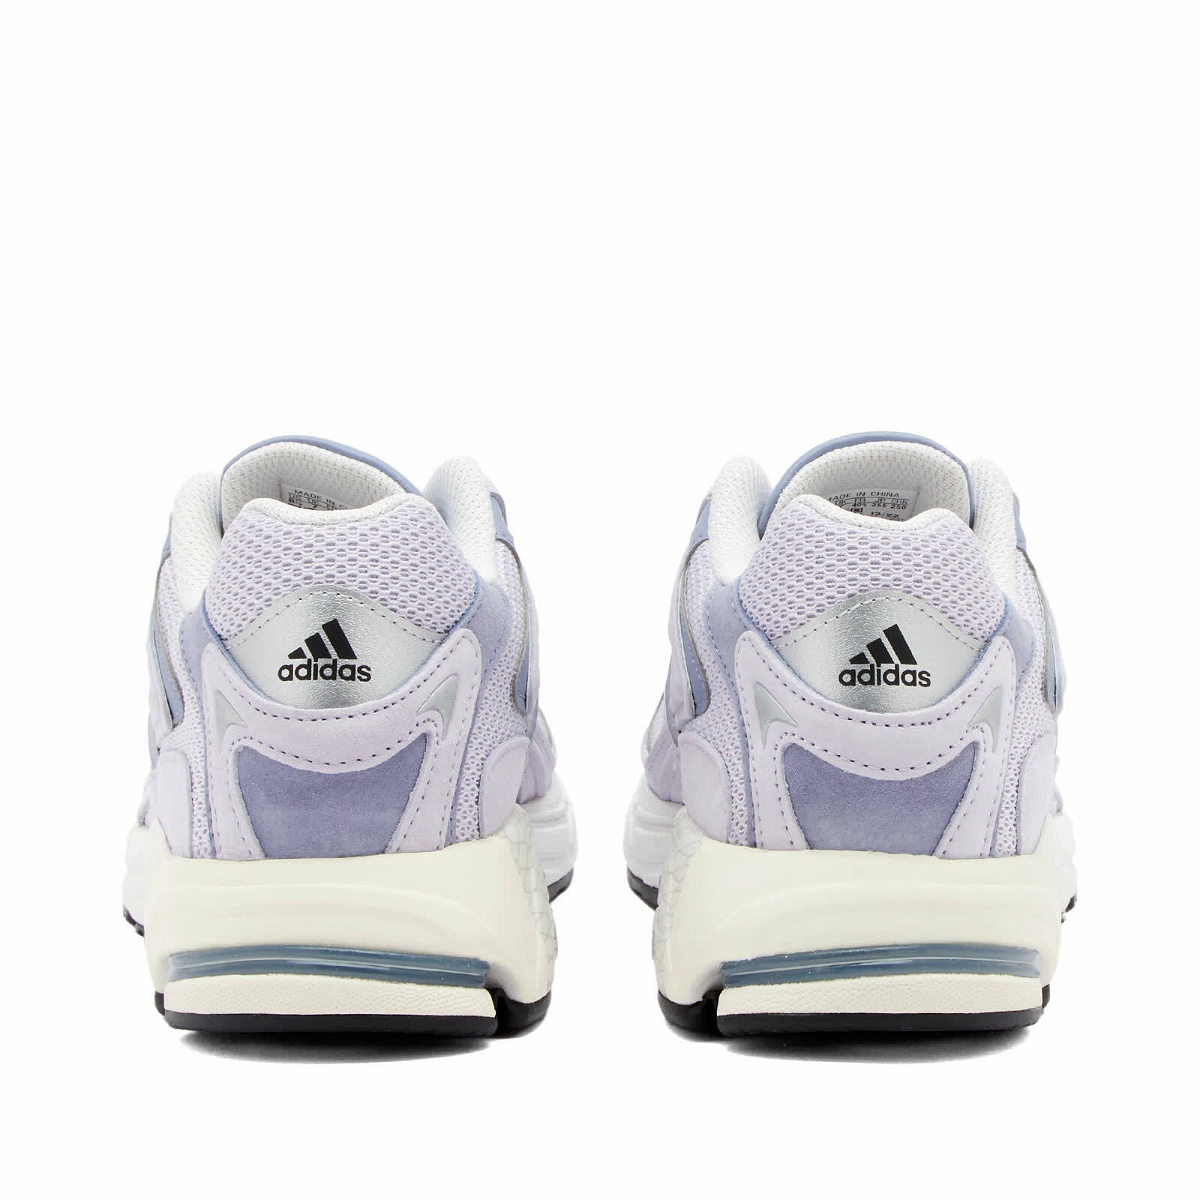 Adidas Women\'s Response CL Sneakers Dawn/Violet/Crystal Silver in W adidas